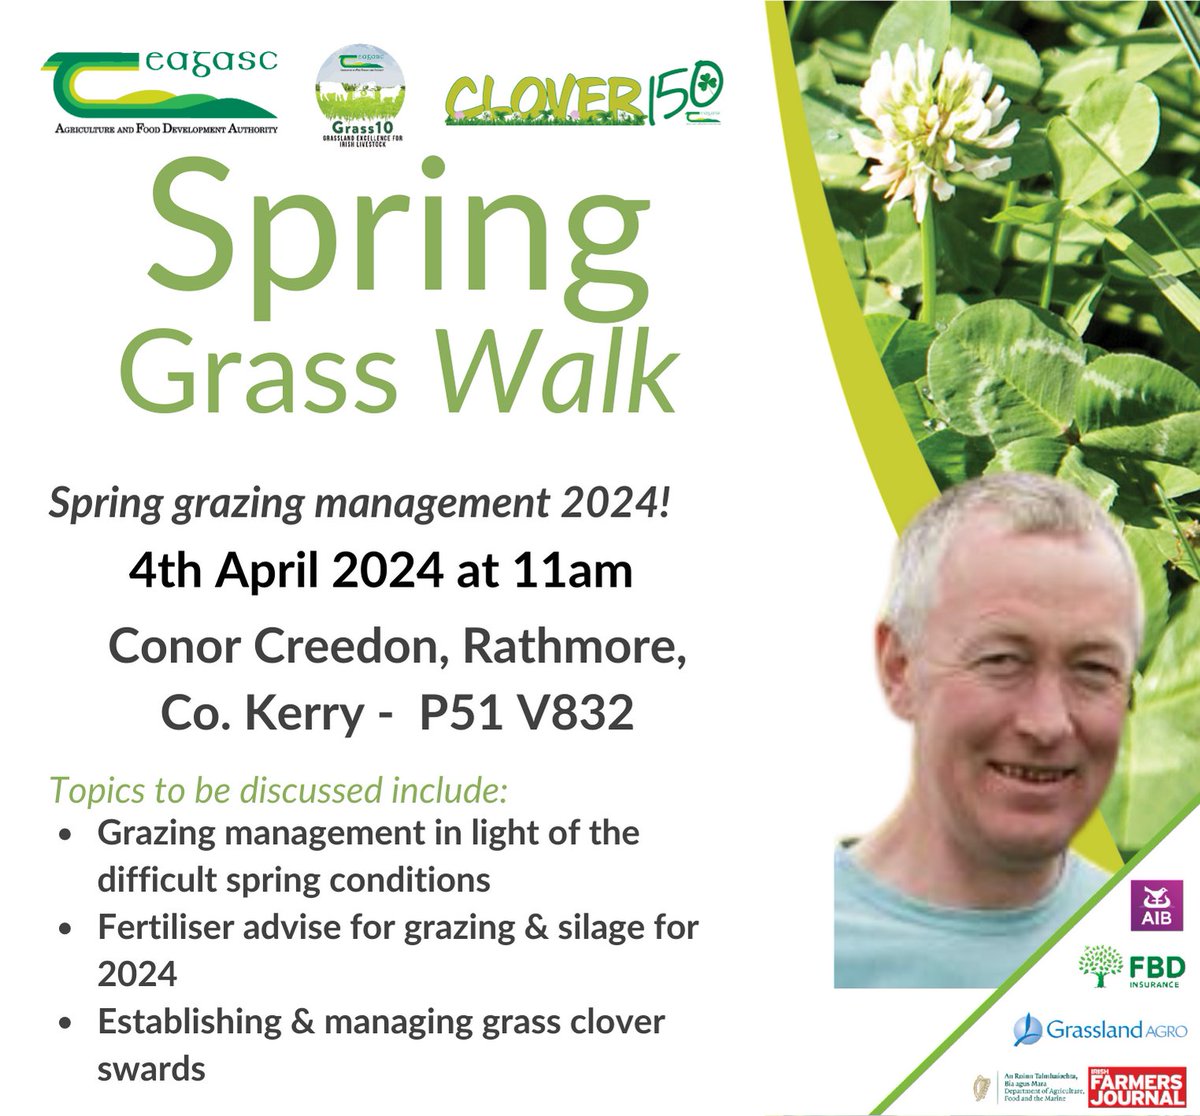 Join us for a Spring Grazing Management Farm Walk on Thursday 4th April from 11am on the farm of Conor Creedon, Rathmore, Co. Kerry P51 V832 Find out more at teagasc.ie/cloverwalks @TeagascGrass10